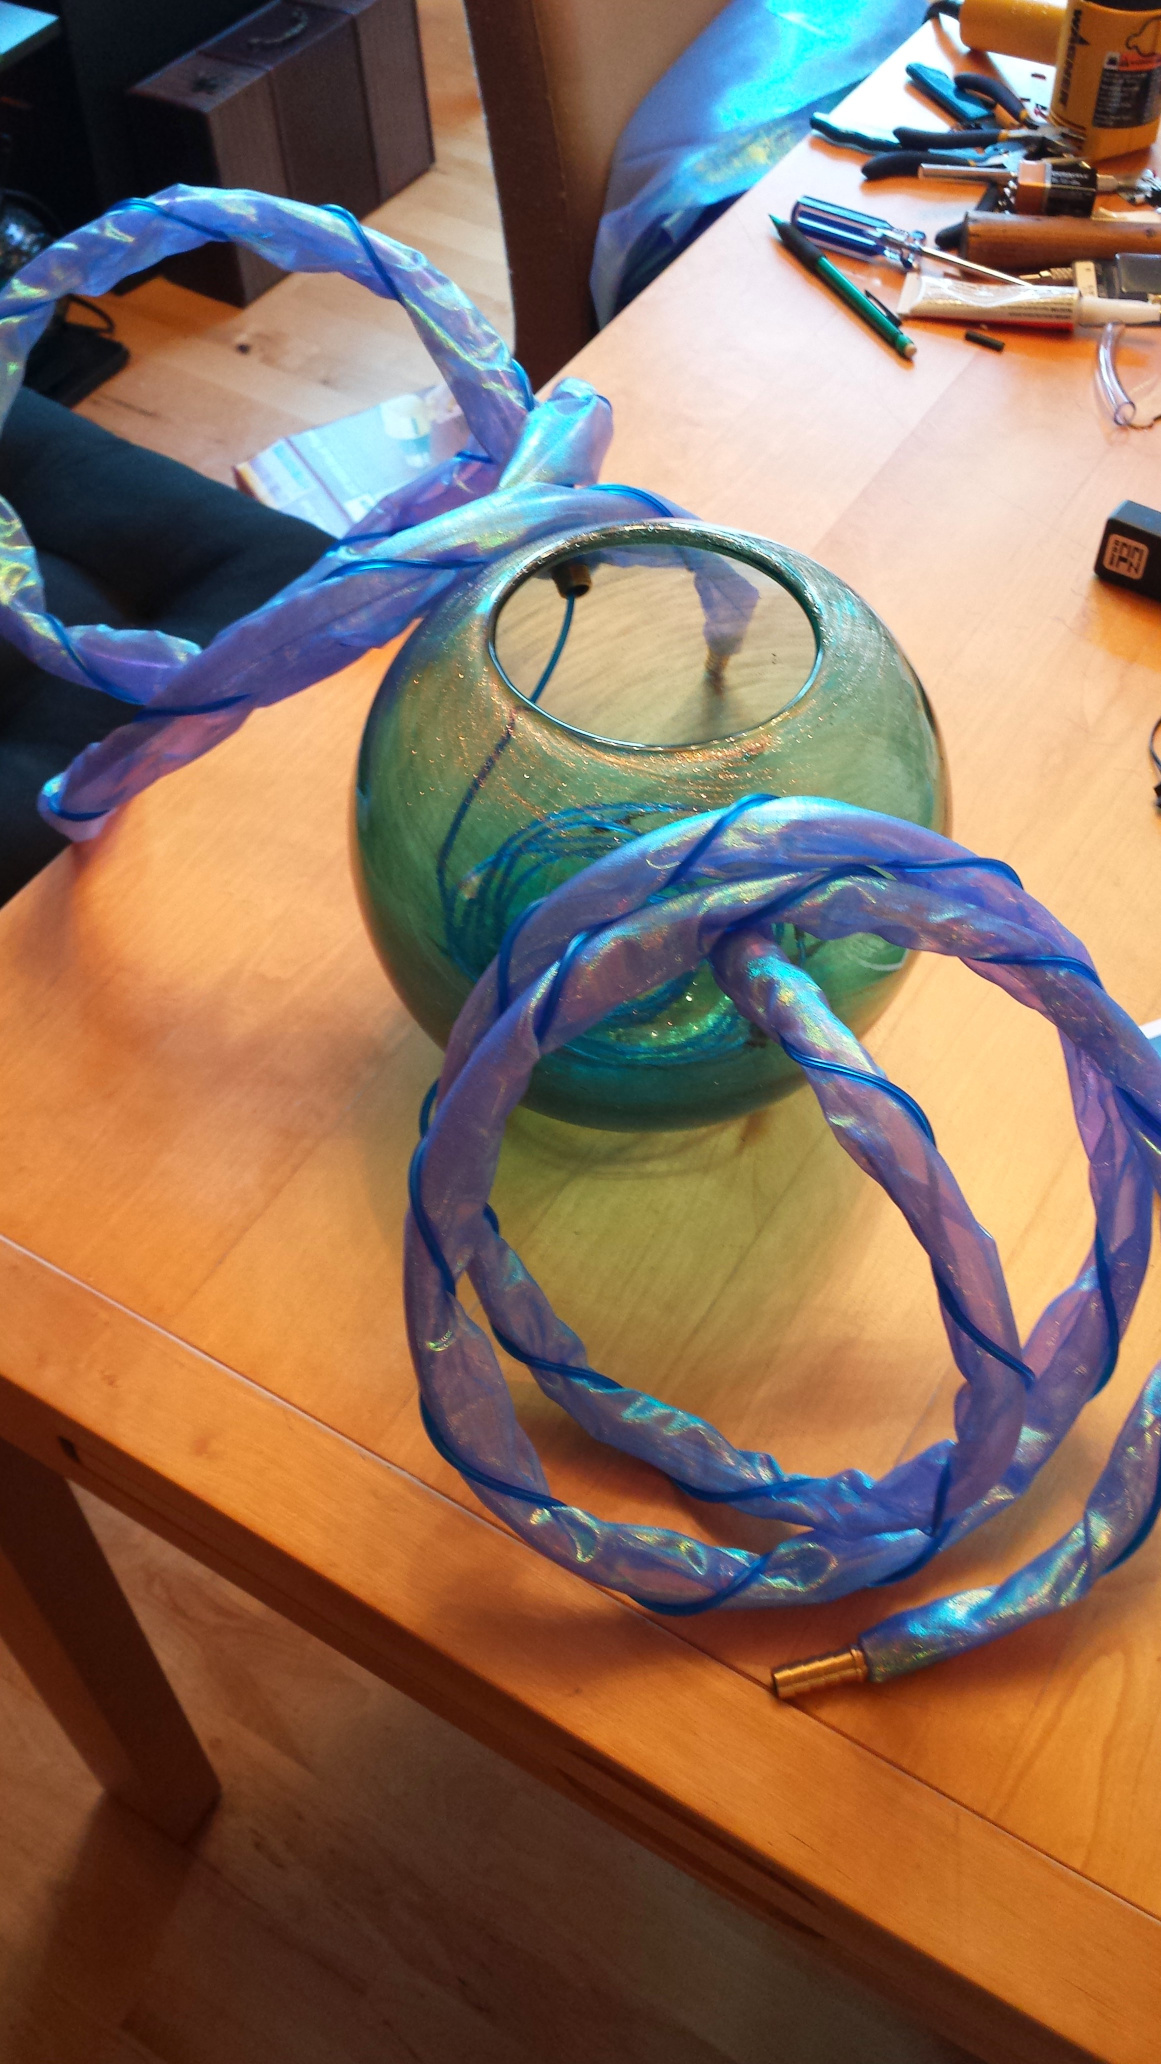 A globe style vase with two hoses coming out of the sides.  The hoses have been wrapped in fabric and a loose spiral of EL wire.